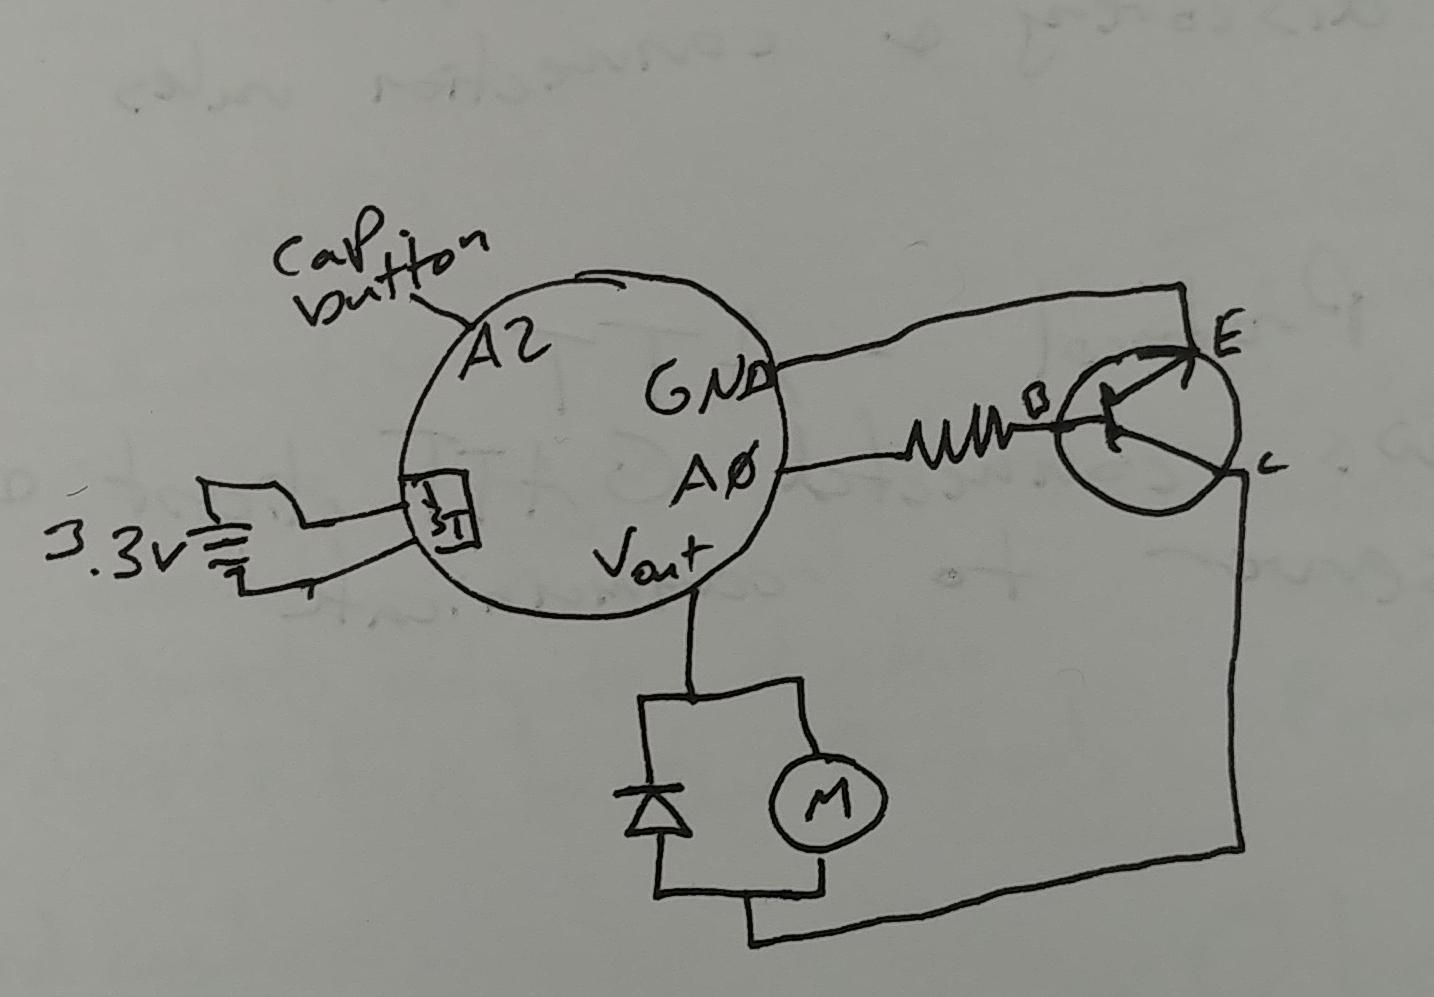 Hand-drawn circuit diagram. Shows the Gemma's Vout pin connected to a diode and vibration motor in parallel, with the diode backwards. They connect to the collector side of a transistor. The transistor's base is connected to the A0 pin on the Gemma, via a resistor. The emitter side of the transistor is attached to Gemma's Ground pin. The Gemma also has a section labeld JST that connects to a batter, and it also has an A2 pin labeled as "cap button".